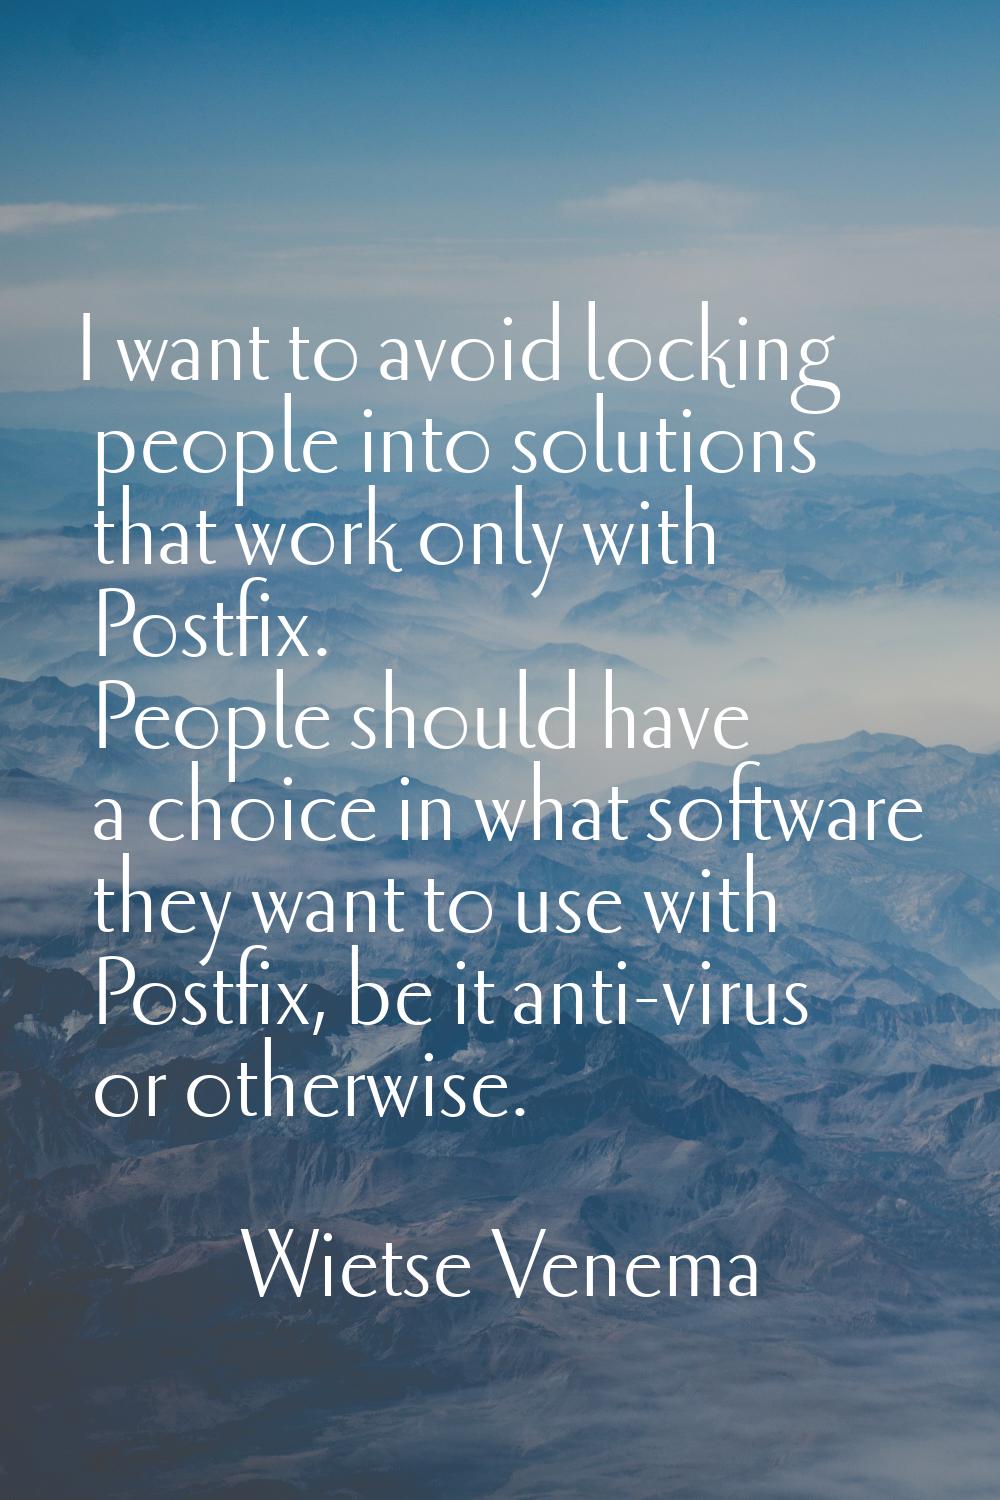 I want to avoid locking people into solutions that work only with Postfix. People should have a cho